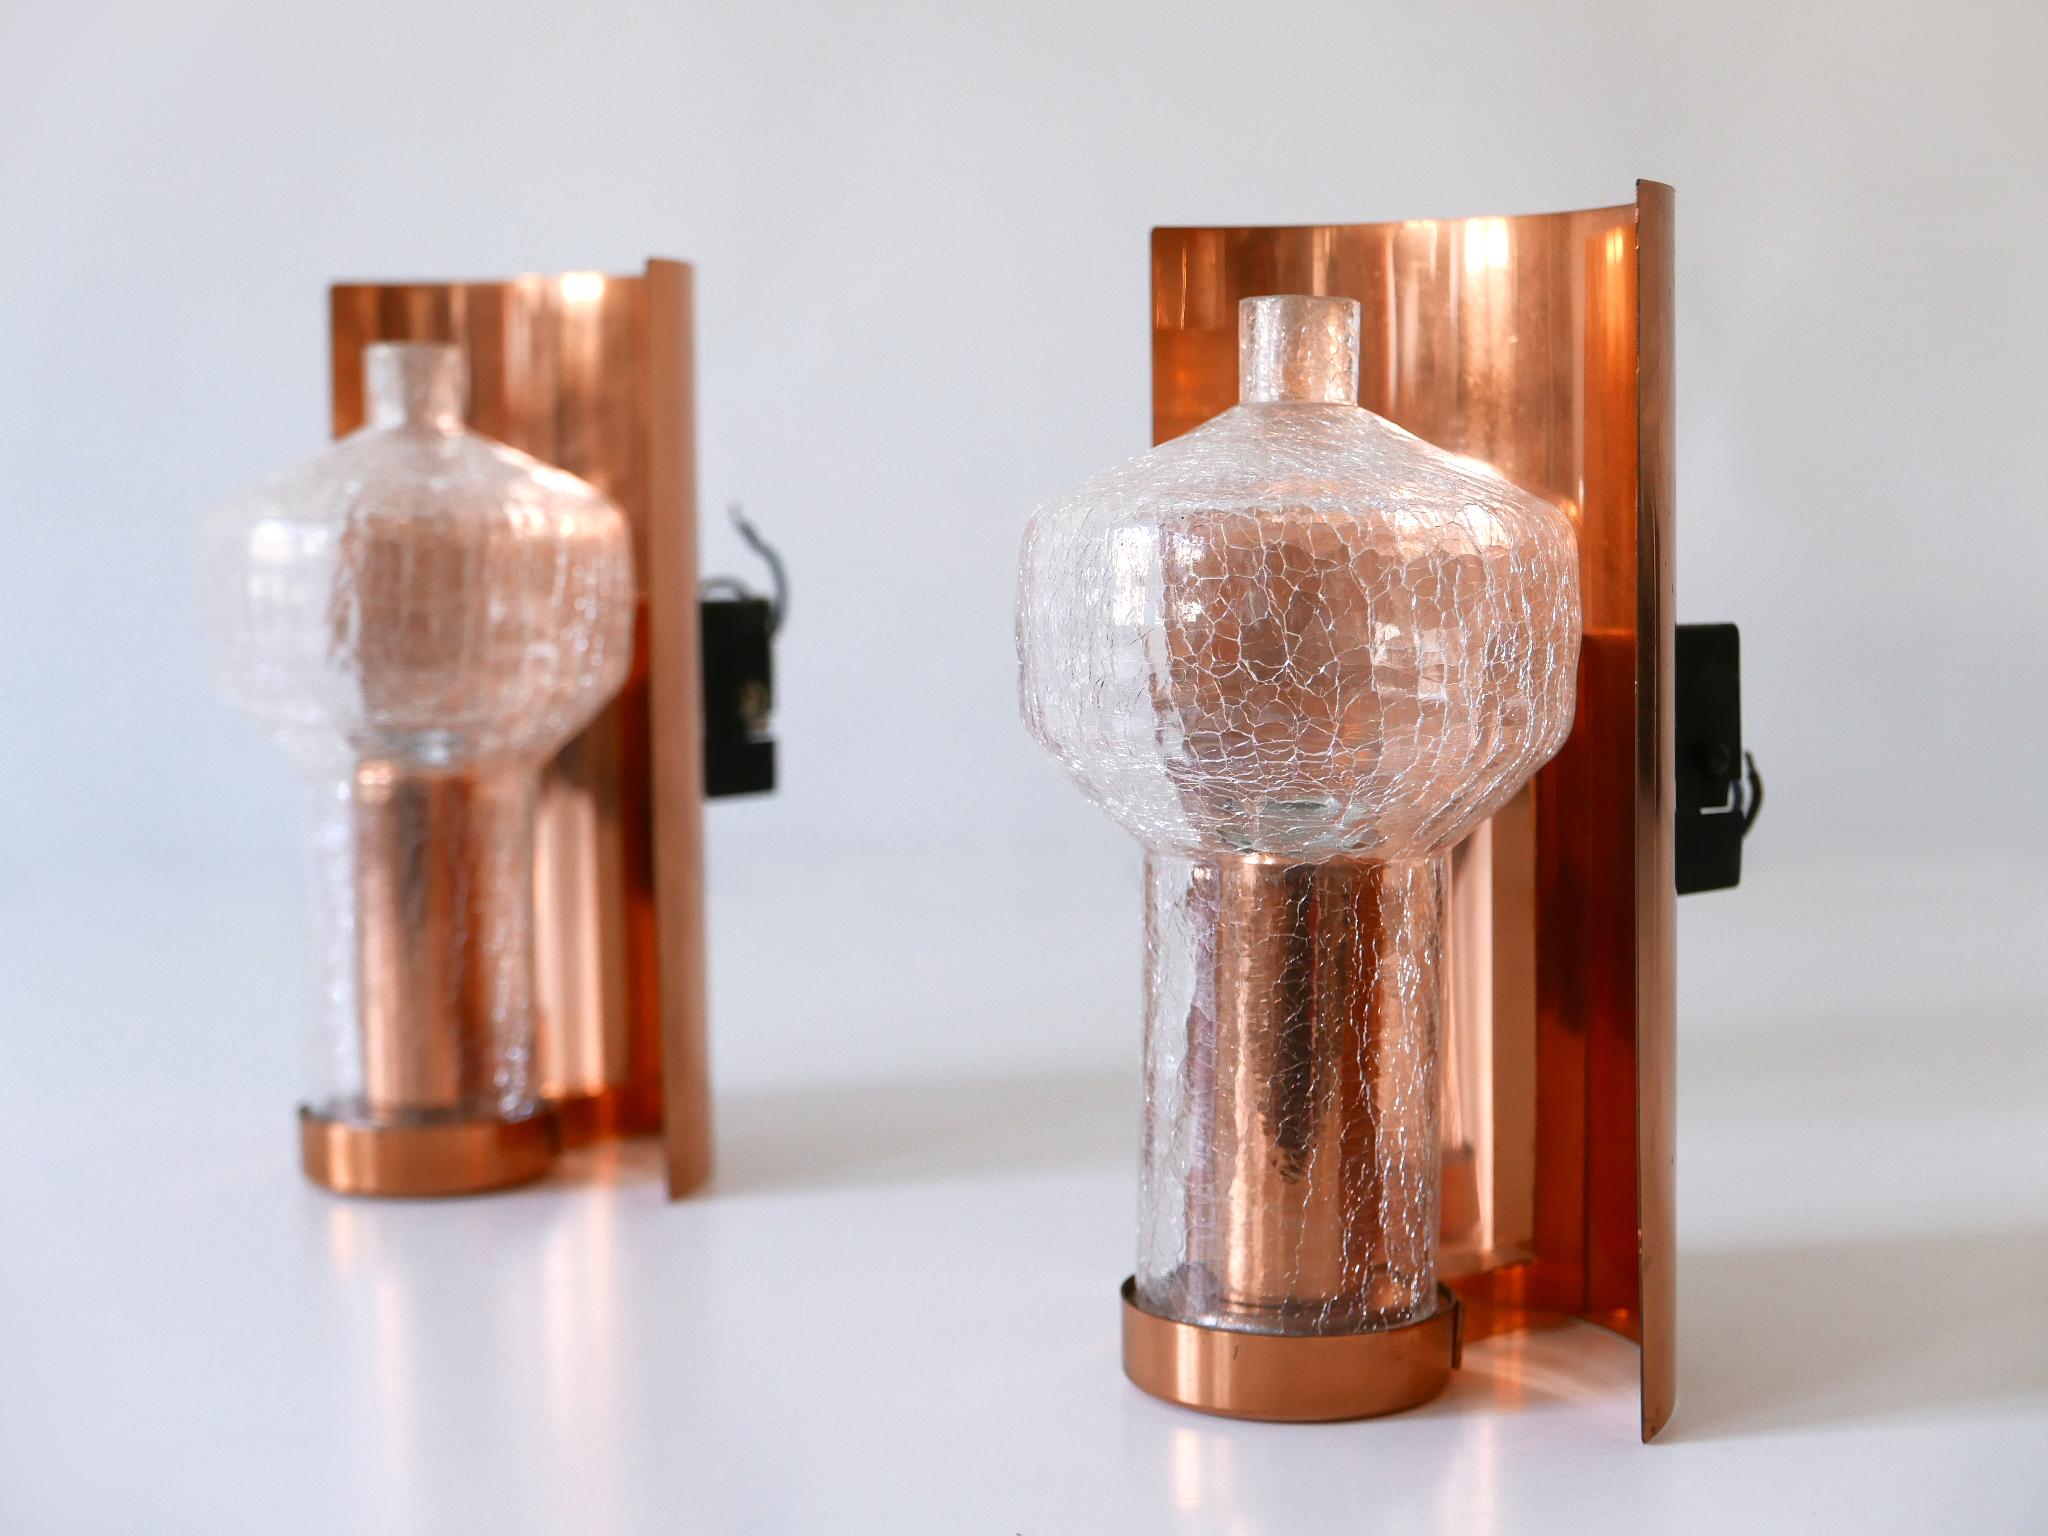 Set of Two Mid-Century Modern Copper & Glass Sconces by Kaiser Leuchten, 1960s For Sale 9